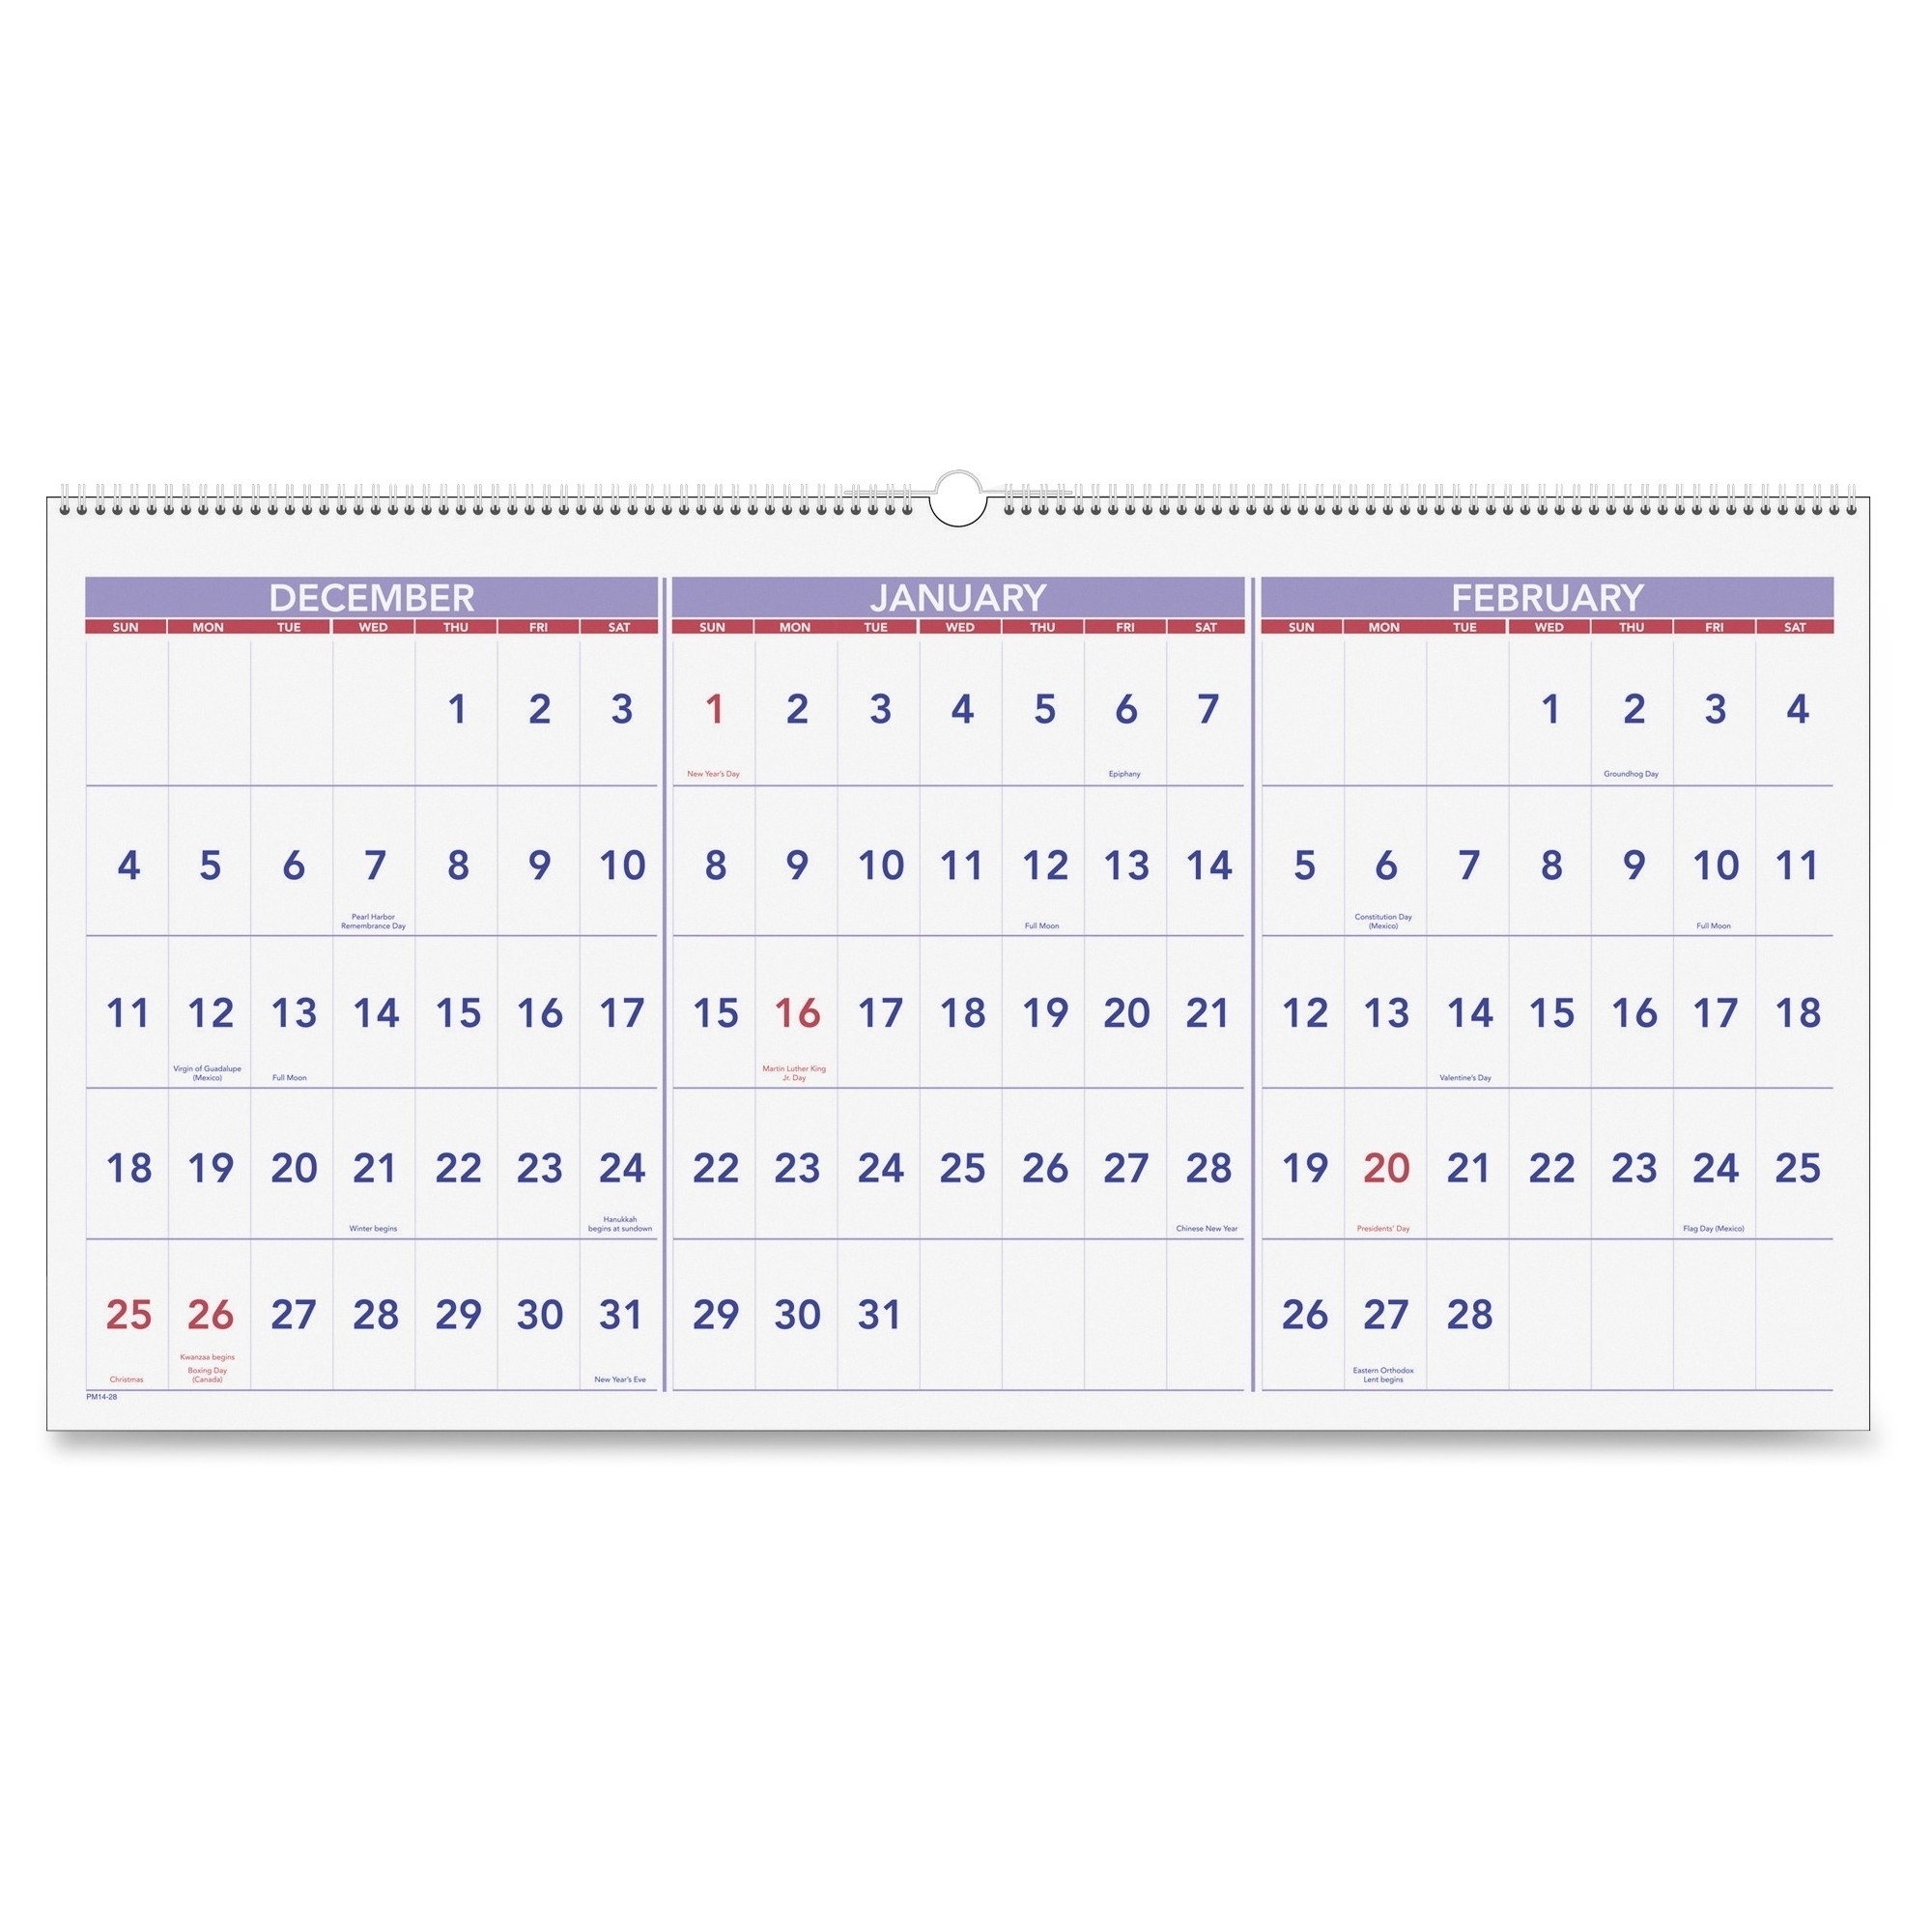 At-A-Glance 3-Months Horizontal Wall Calendar - Ld Products intended for 3 Months In One Calenadar